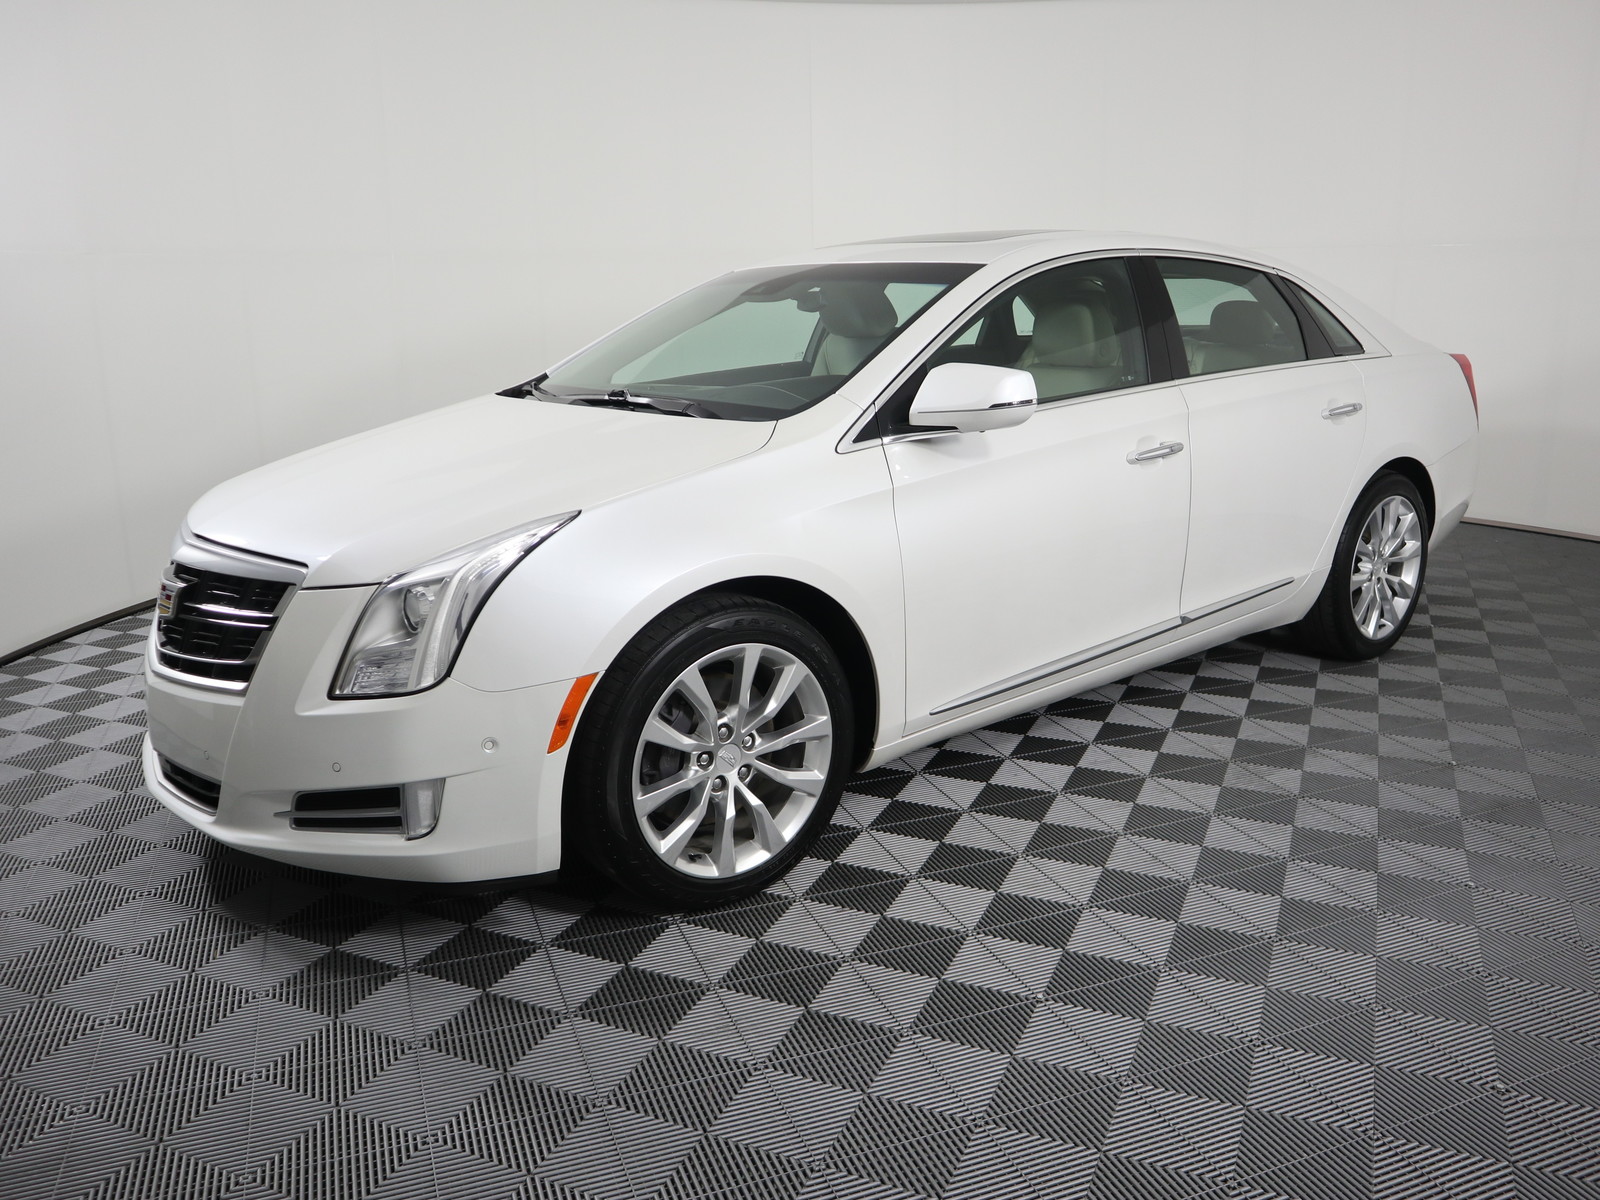 Pre-Owned 2016 Cadillac XTS 4dr Sdn Luxury Collection FWD 4dr Car in